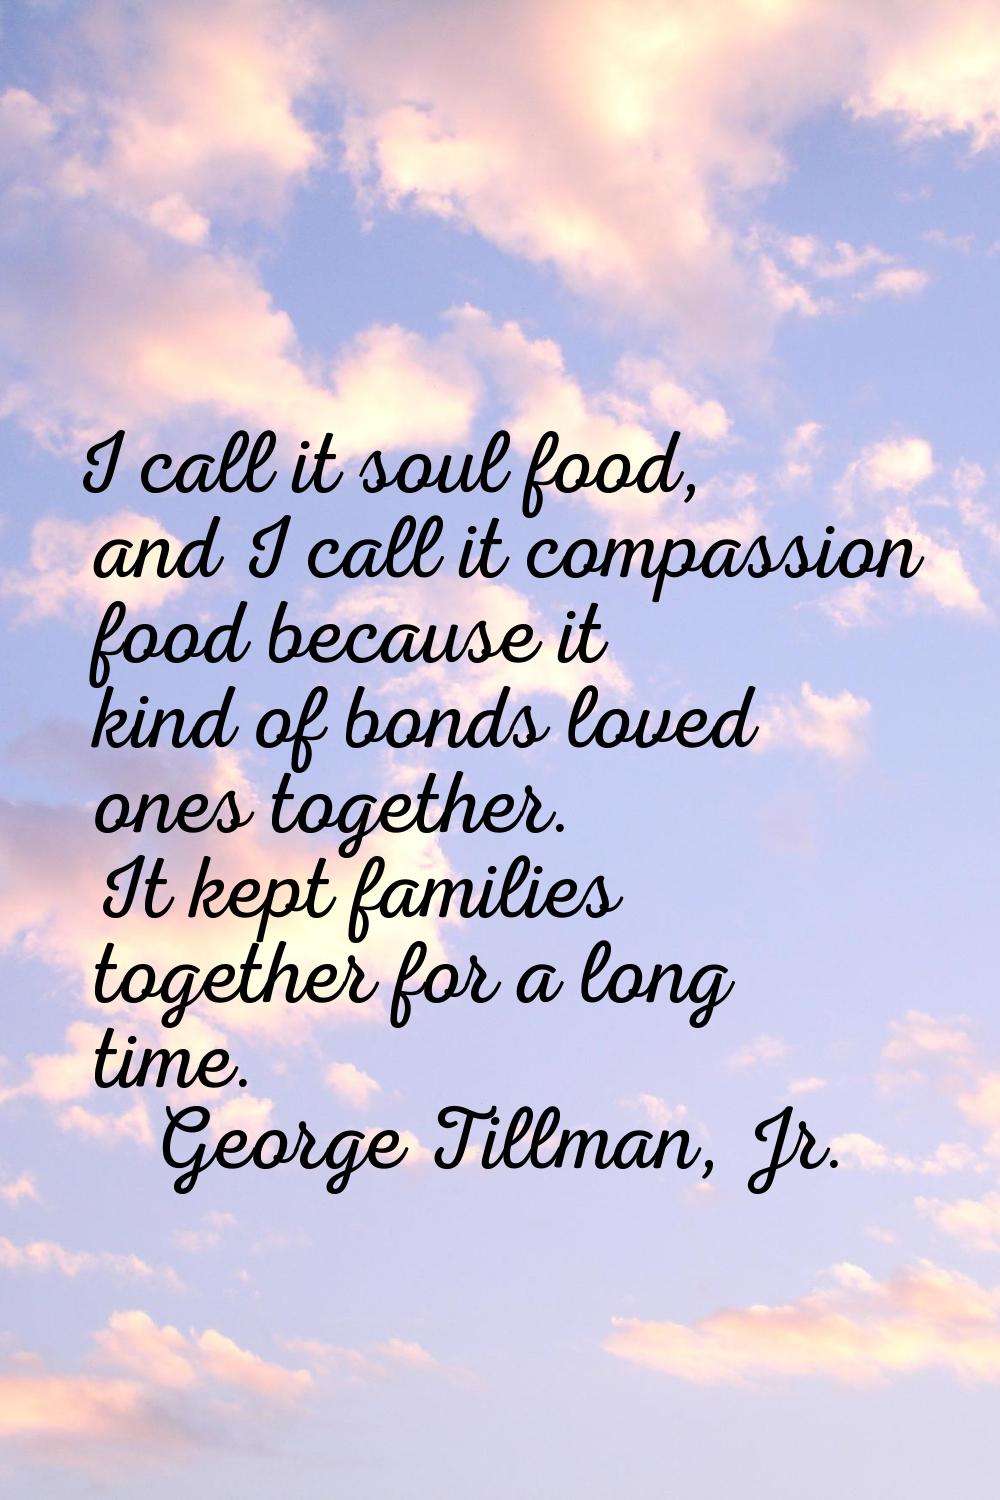 I call it soul food, and I call it compassion food because it kind of bonds loved ones together. It